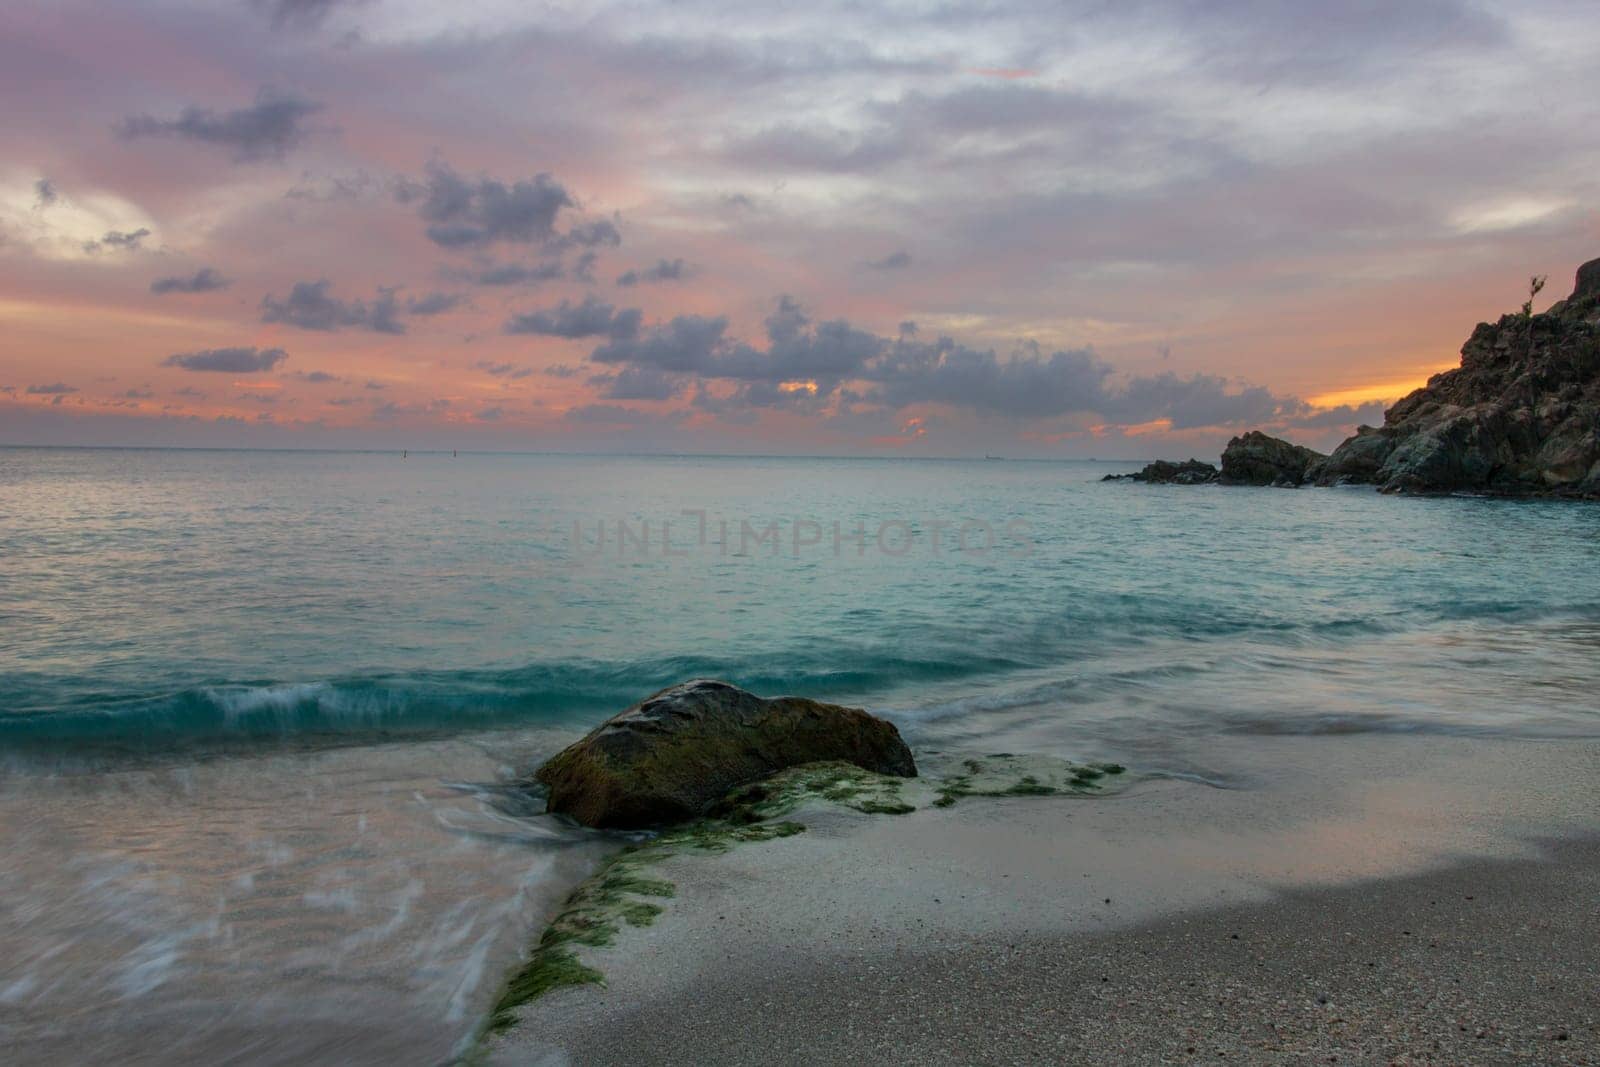 View of a peaceful sunset and waves on Shell Beach, Saint Barthélemy (St. Barts)